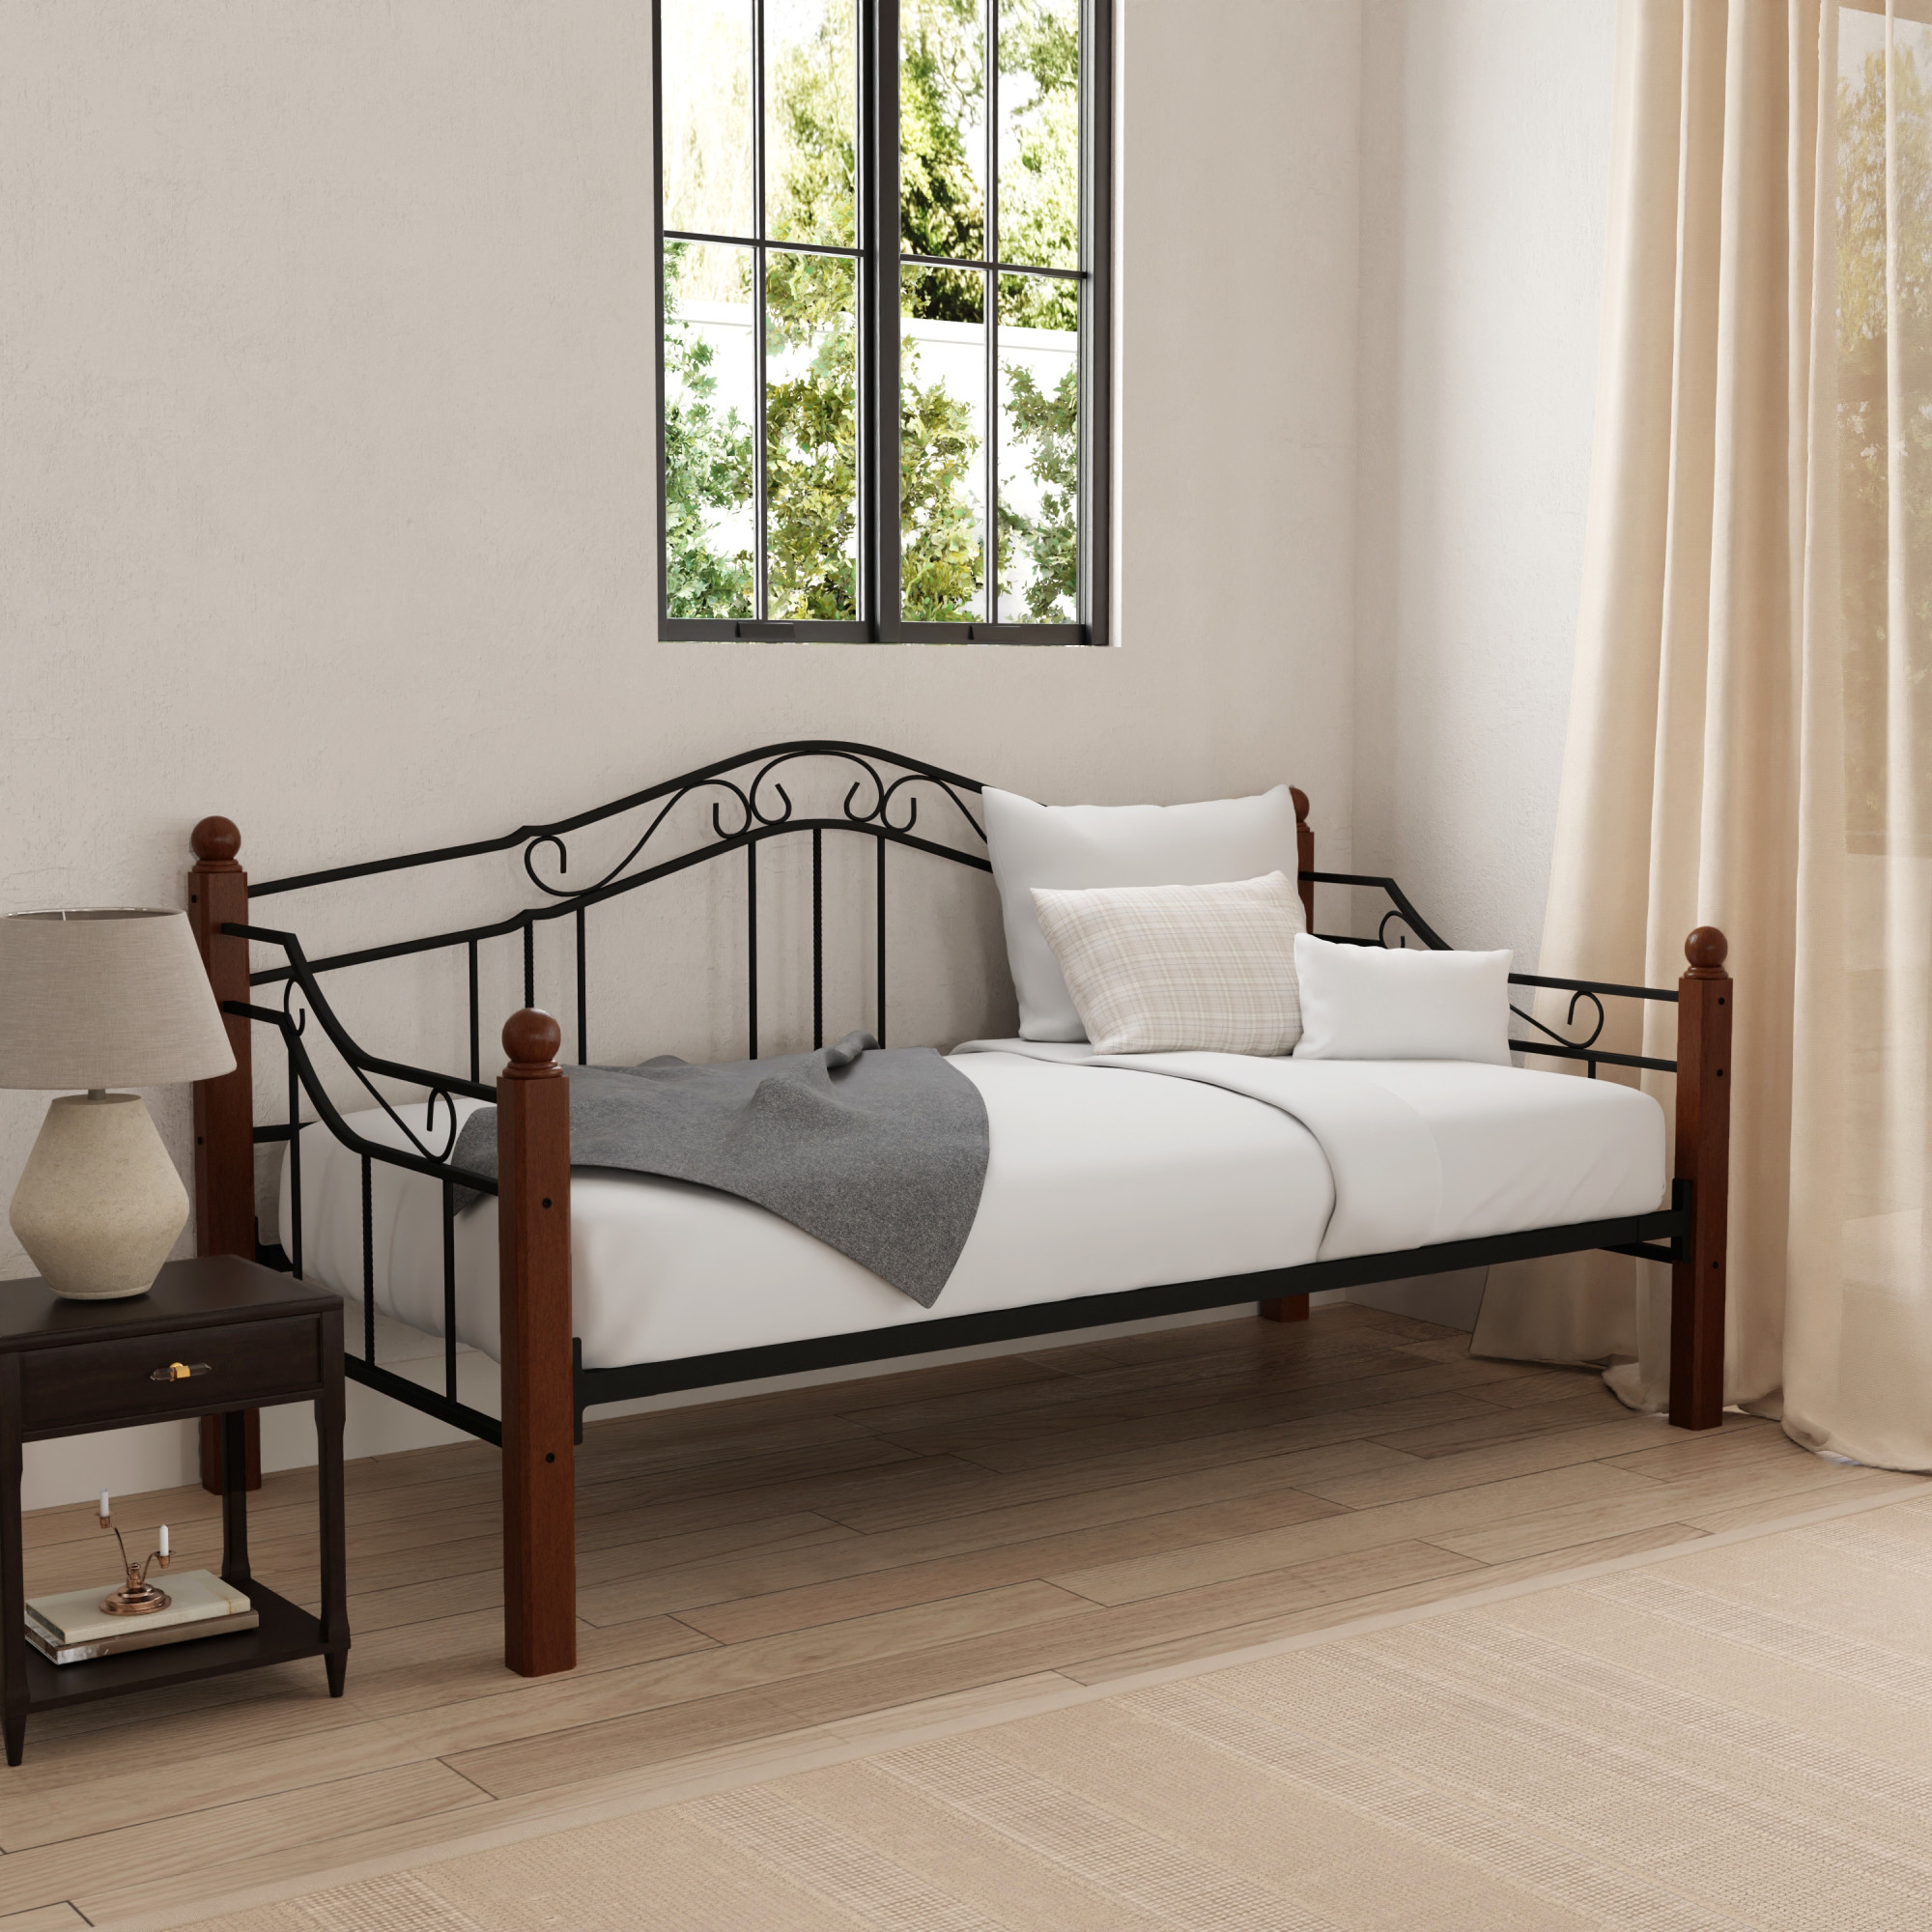 Hillsdale Furniture Madison Wood and Metal Twin Daybed, Black with Cherry Posts - image 1 of 14